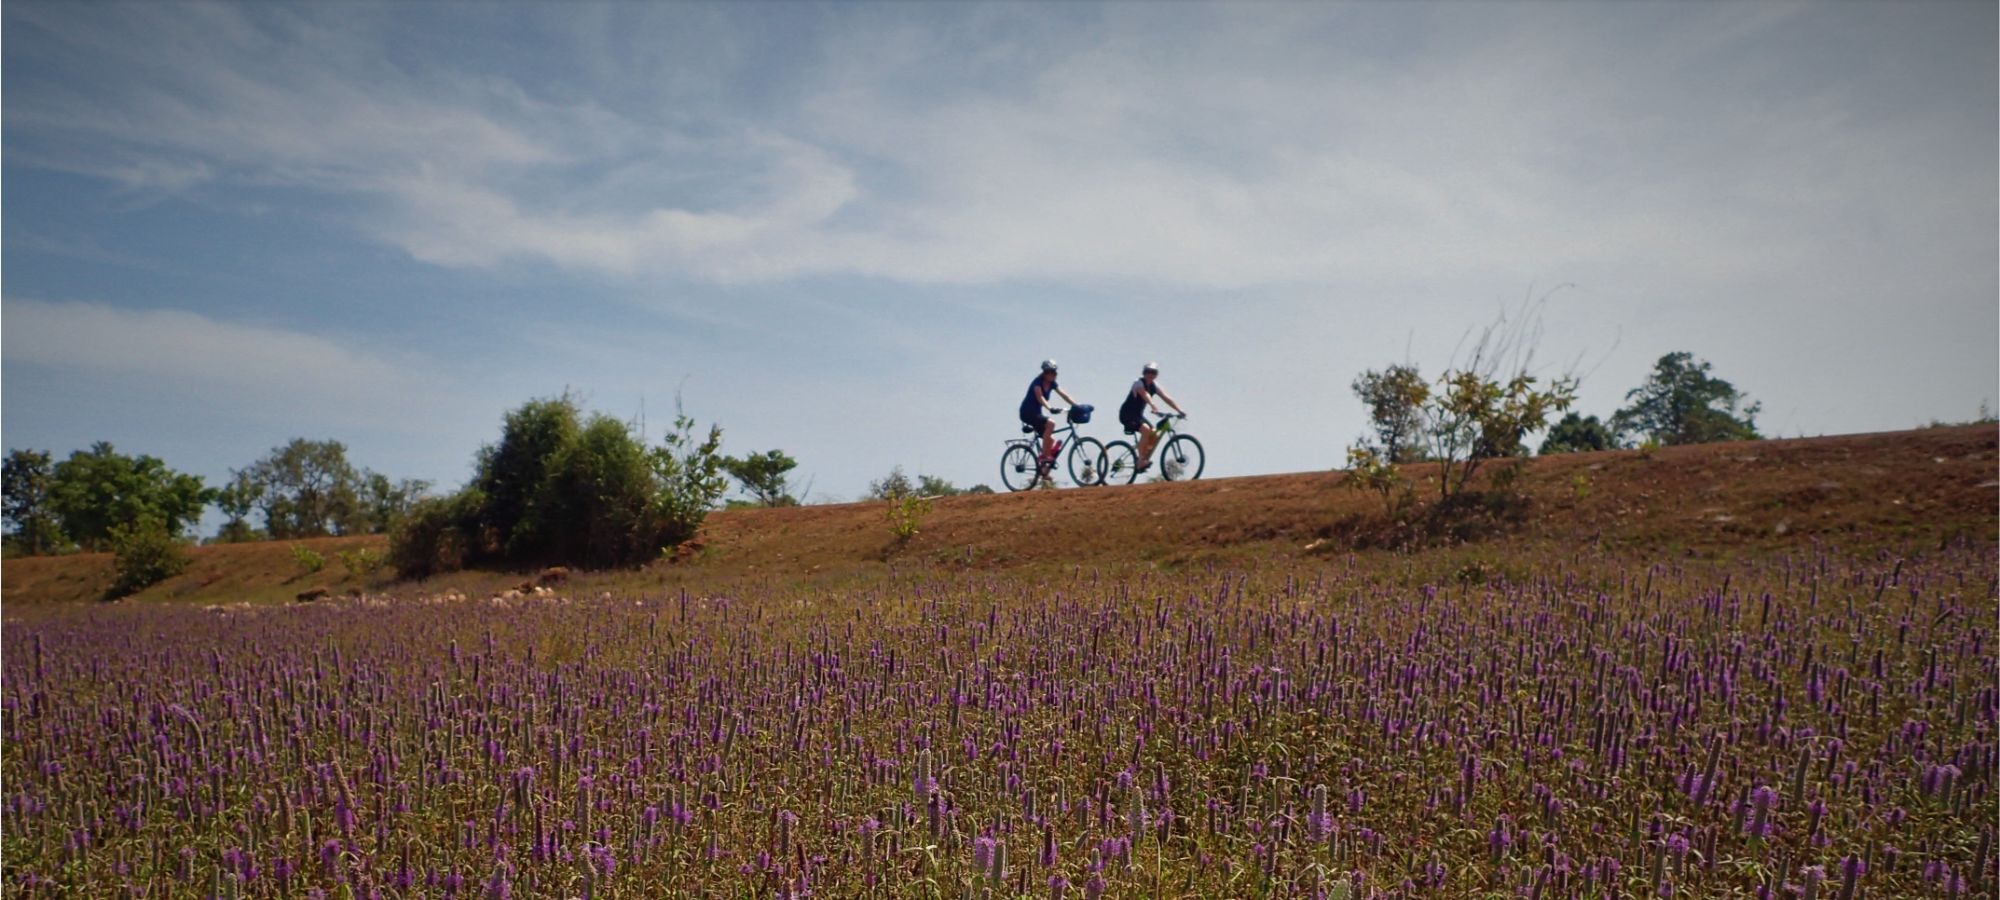 cycle tours cambodia